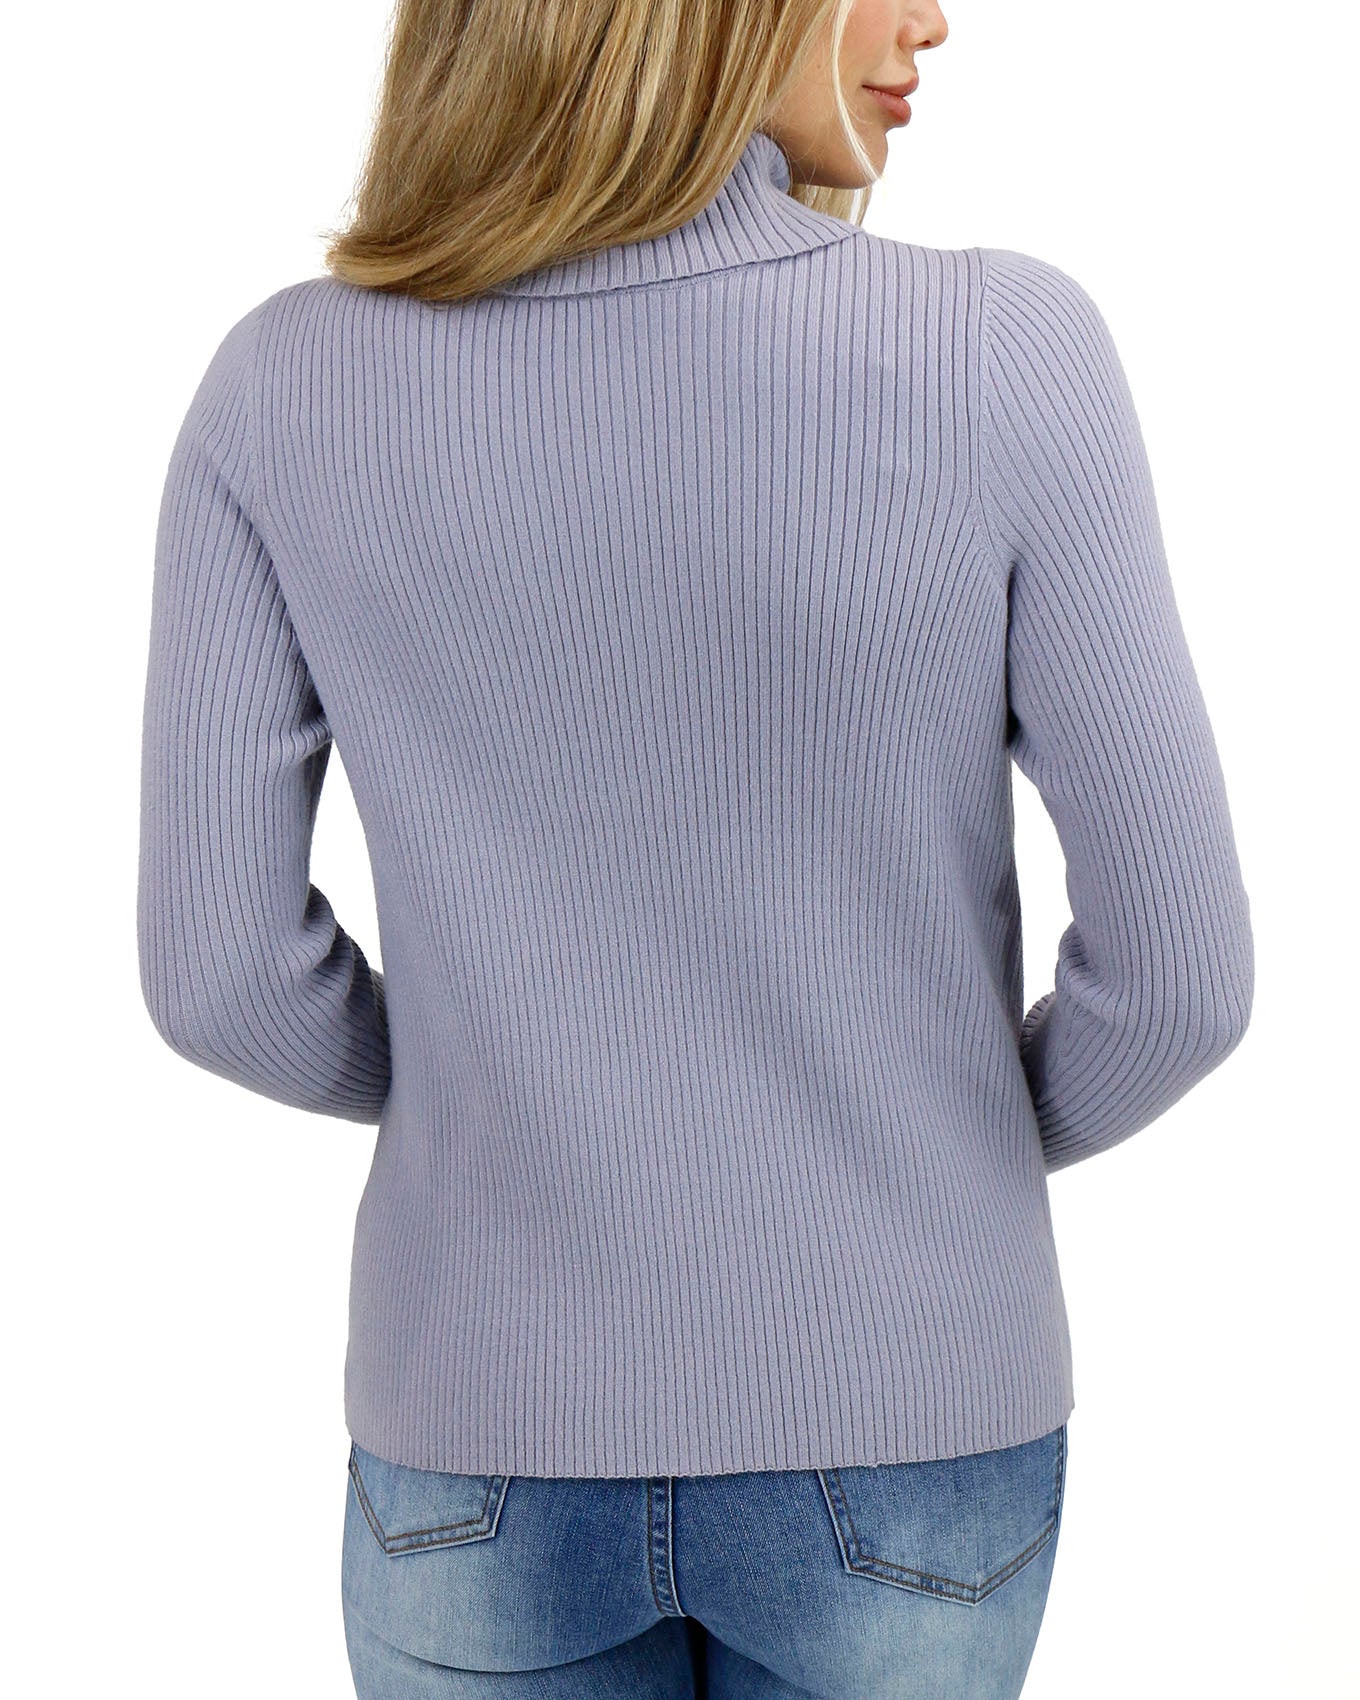 Oh So Soft Light Blue Ribbed Turtleneck - Grace and Lace